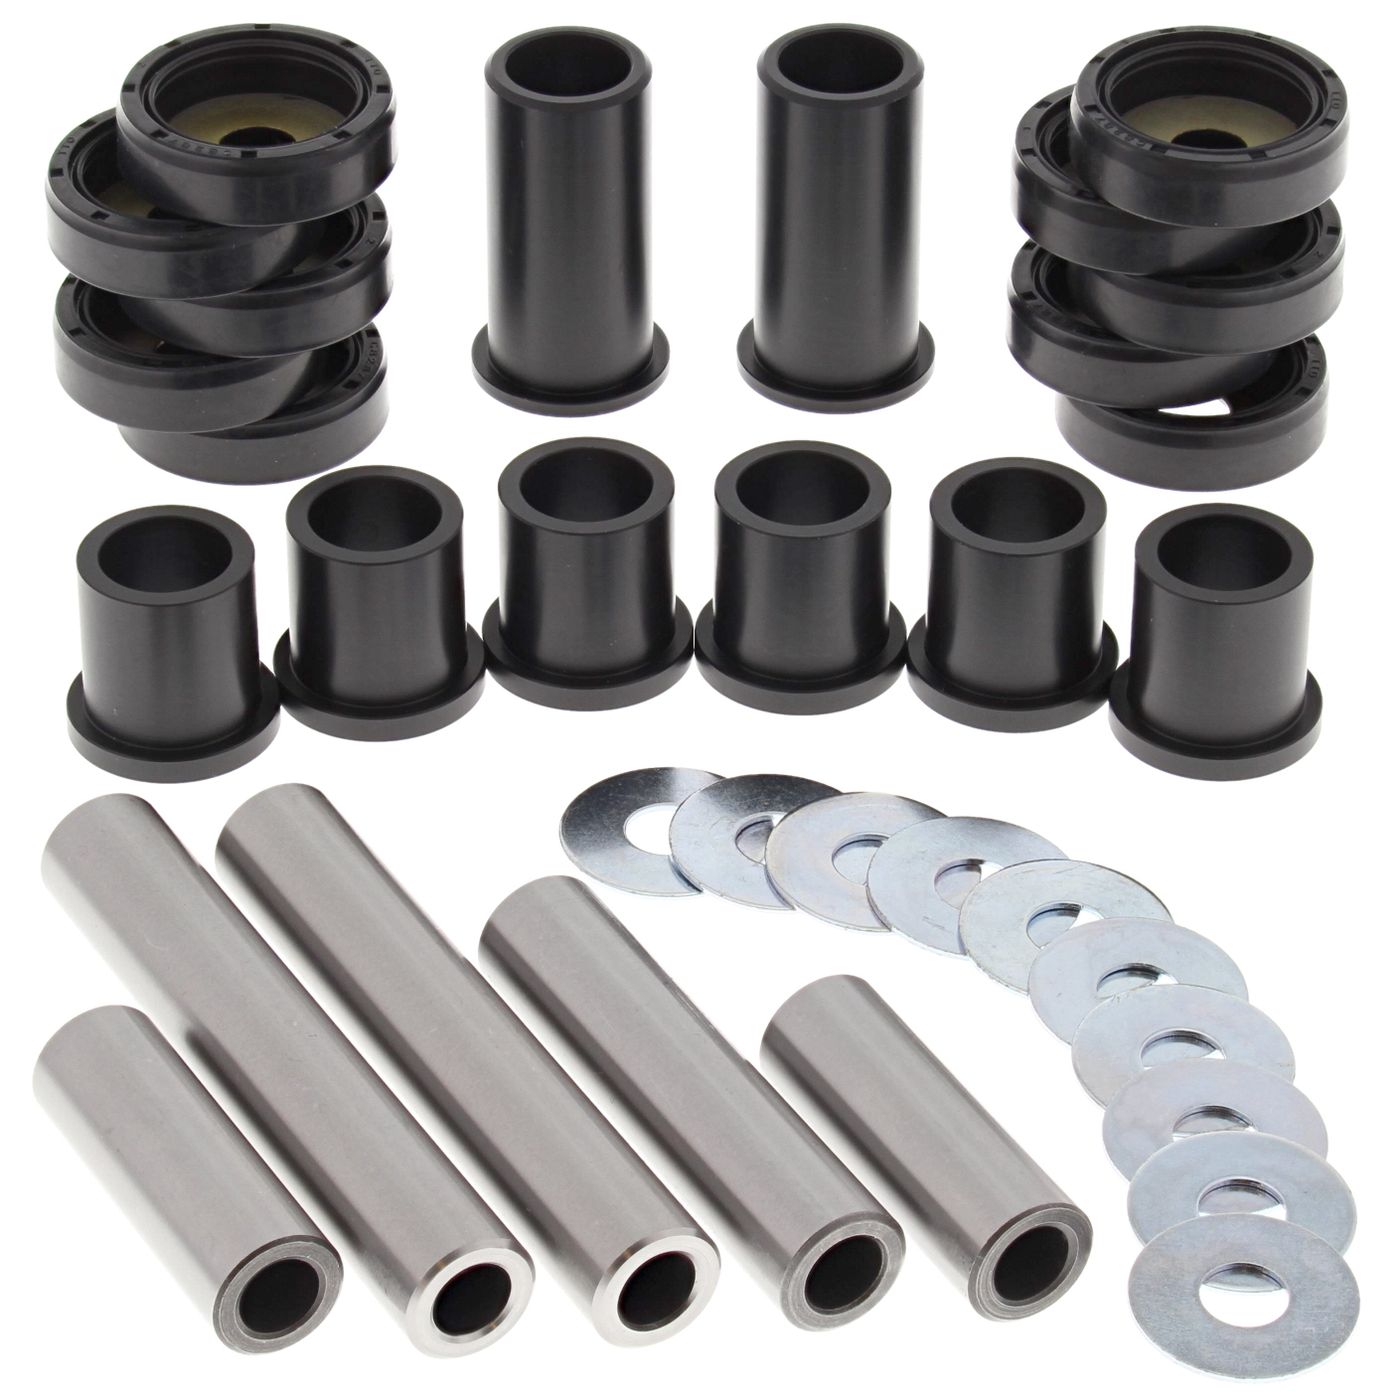 Wrp Rear Ind. Suspension Kits - WRP501041 image